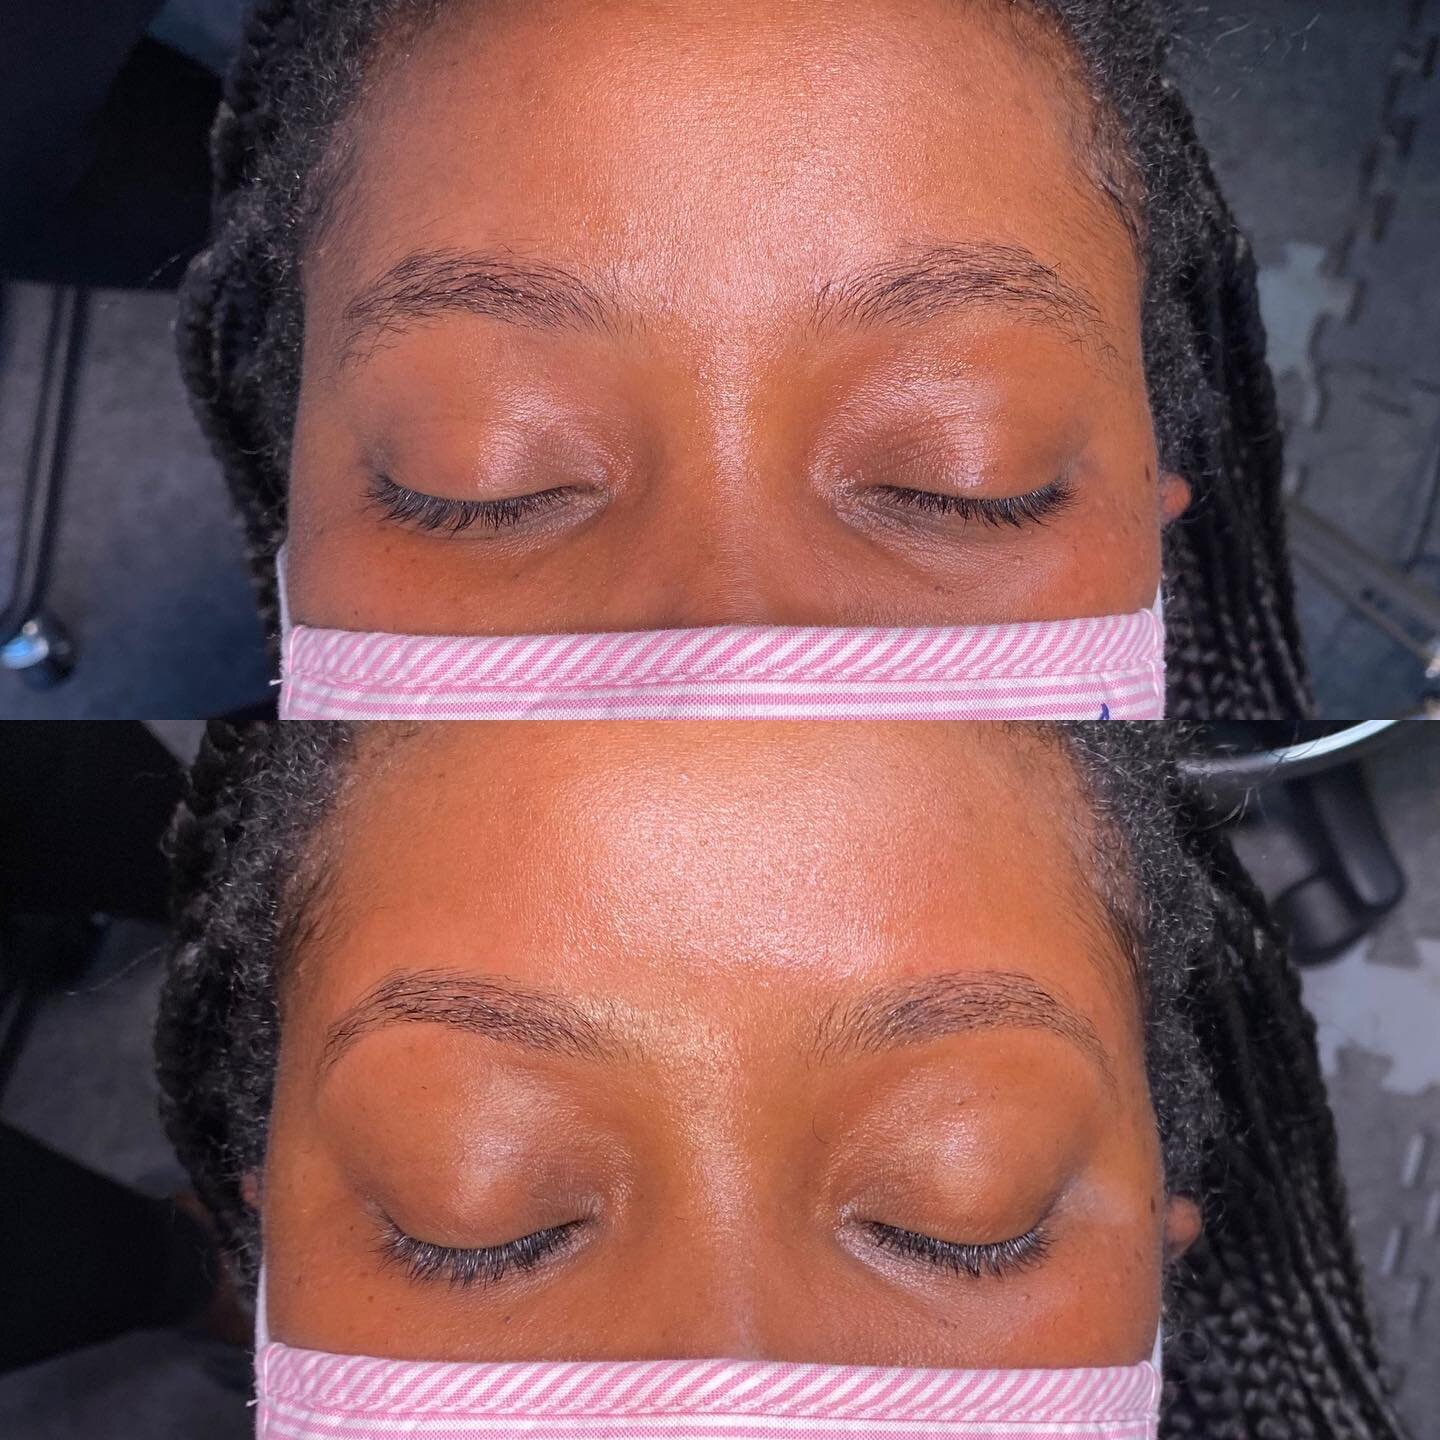 Y&rsquo;all still like pictures?
📸 
Here&rsquo;s a little before &lsquo;N after for your viewing pleasure 
😇 
#brittbrow #eyebrows #idobrows #brows #browartist #browwaxing #brows #eyebrows #wax #waxing #browshaping #eyebrowwax #threading #before #a